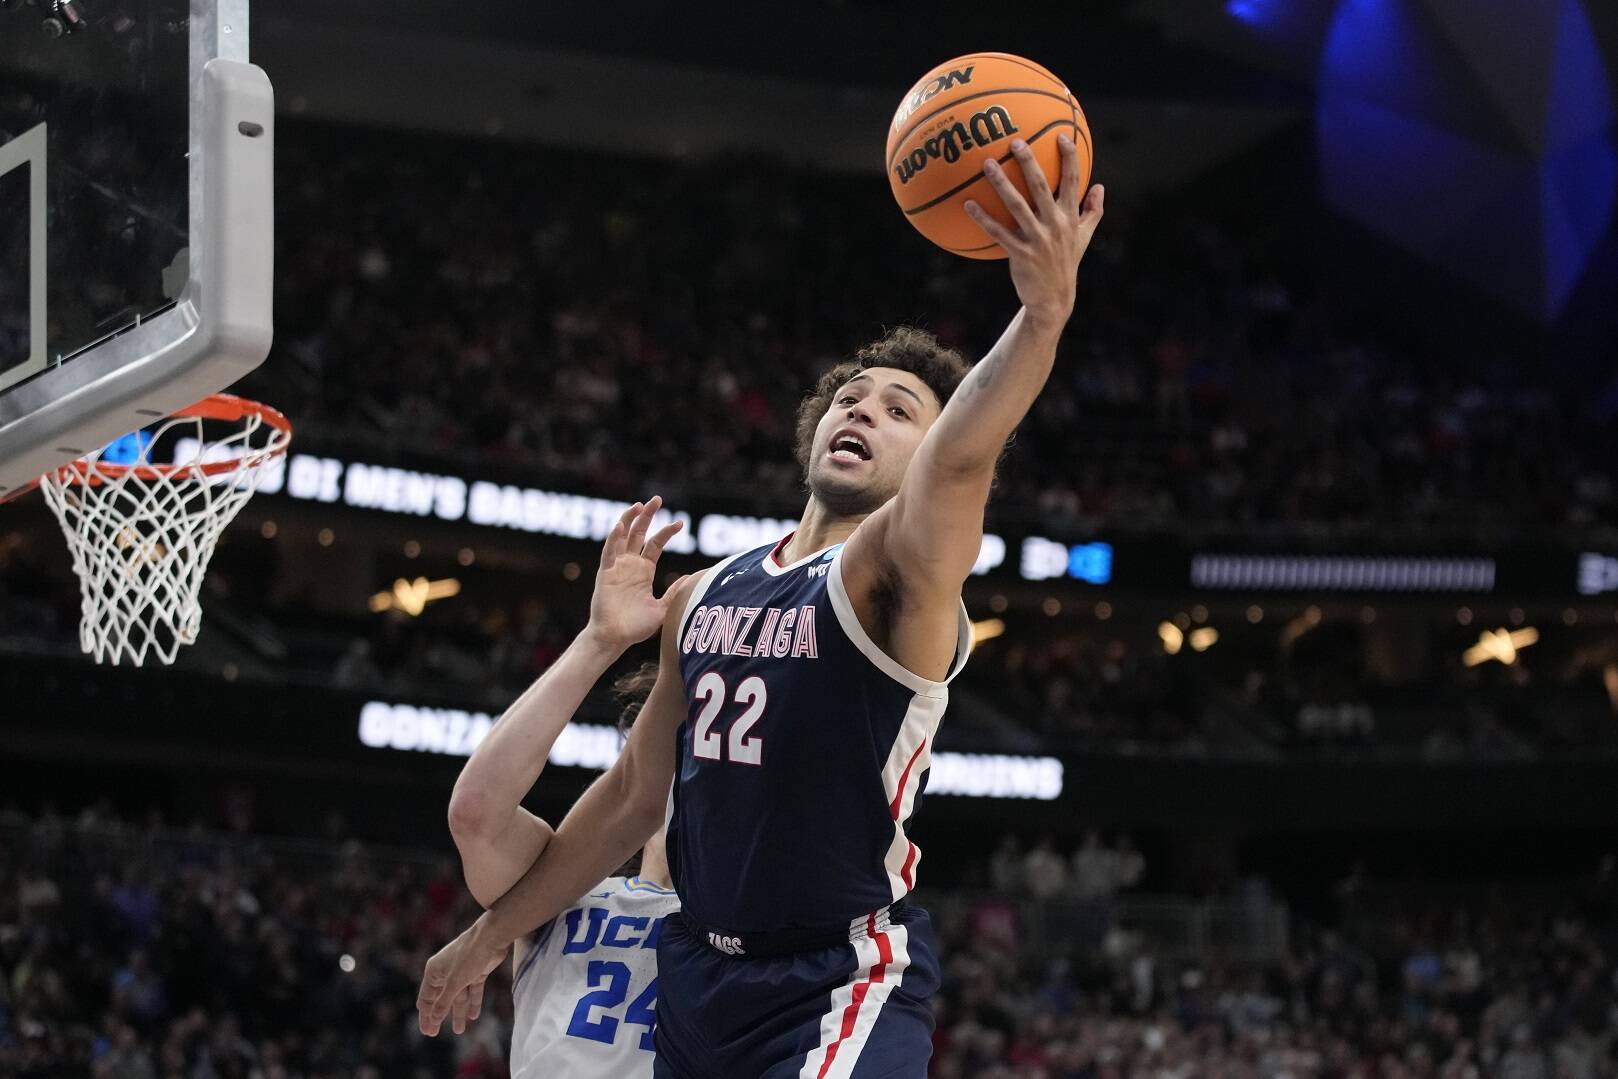 Gonzaga's Anton Watson (22) reaches for the ball in the second half of a Sweet 16 college basketball game against UCLA in the West Regional of the NCAA Tournament, Thursday, March 23, 2023, in Las Vegas. (AP Photo/John Locher)